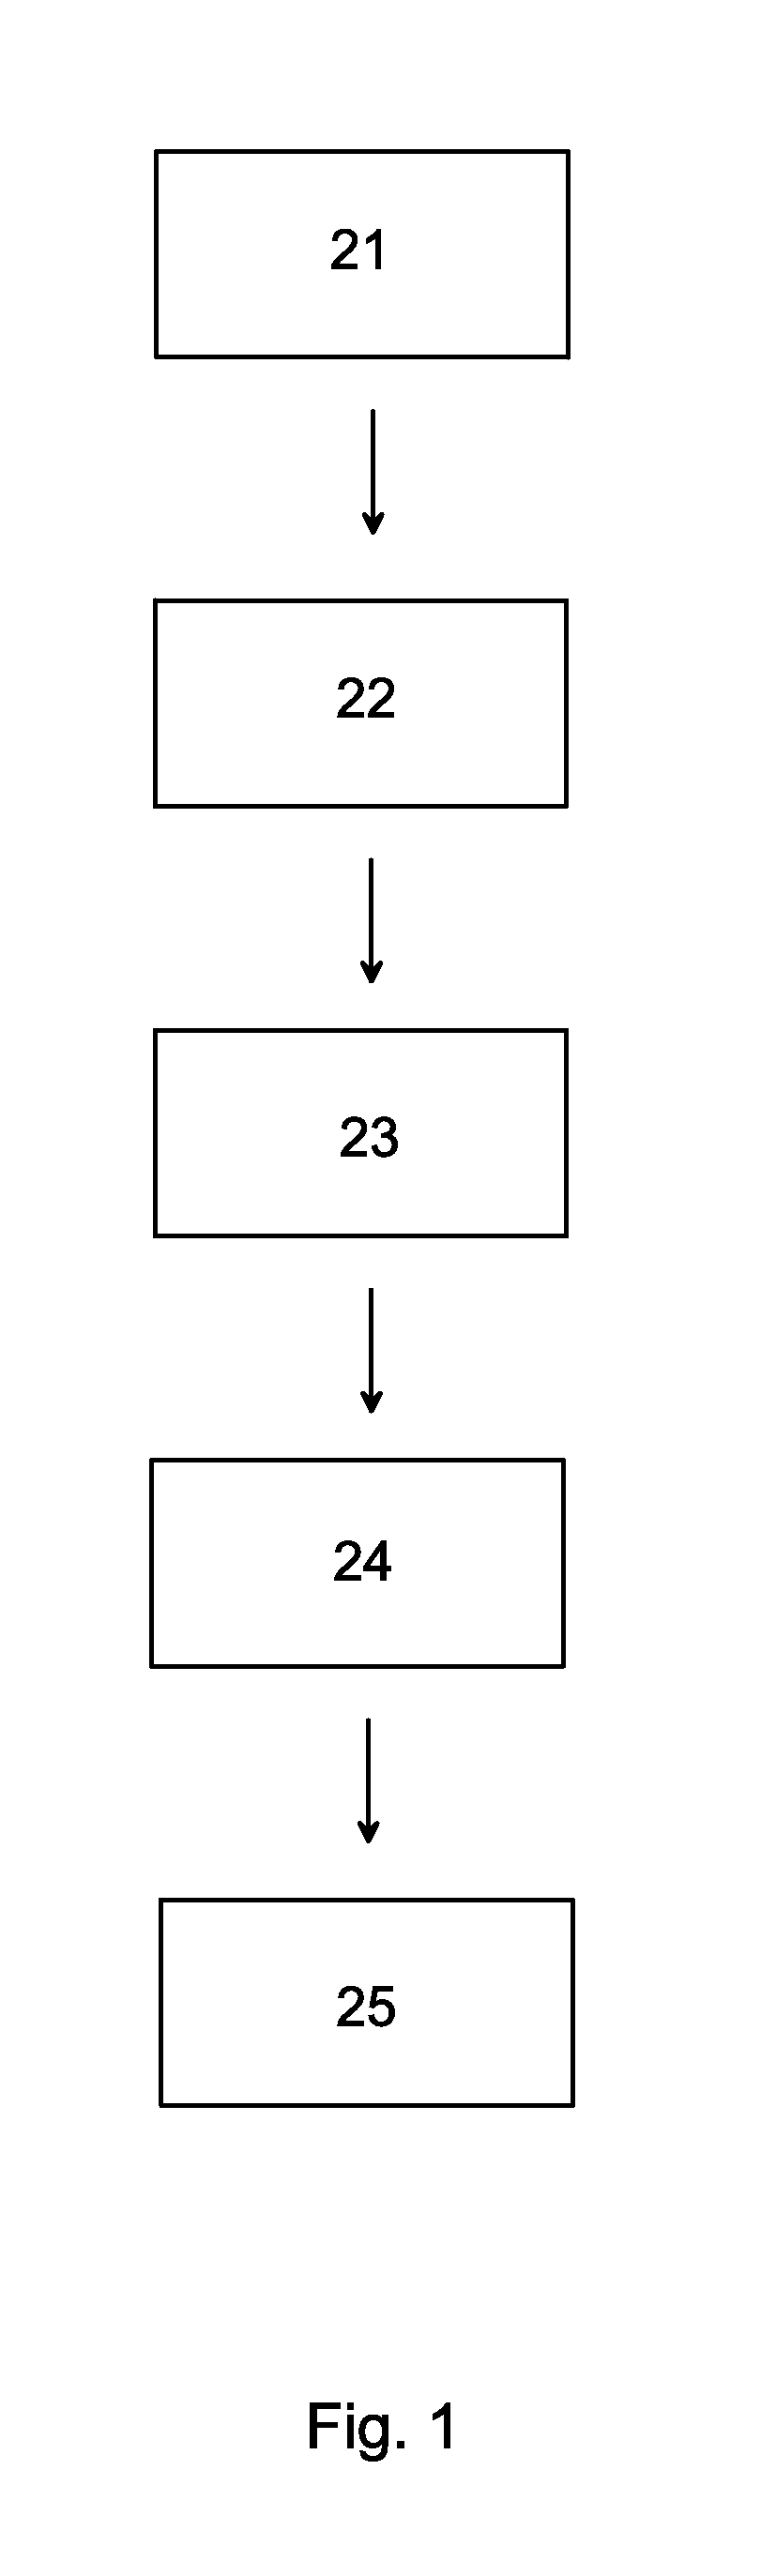 Method for providing an insulated electric high voltage DC cable or a high voltage DC termination or joint